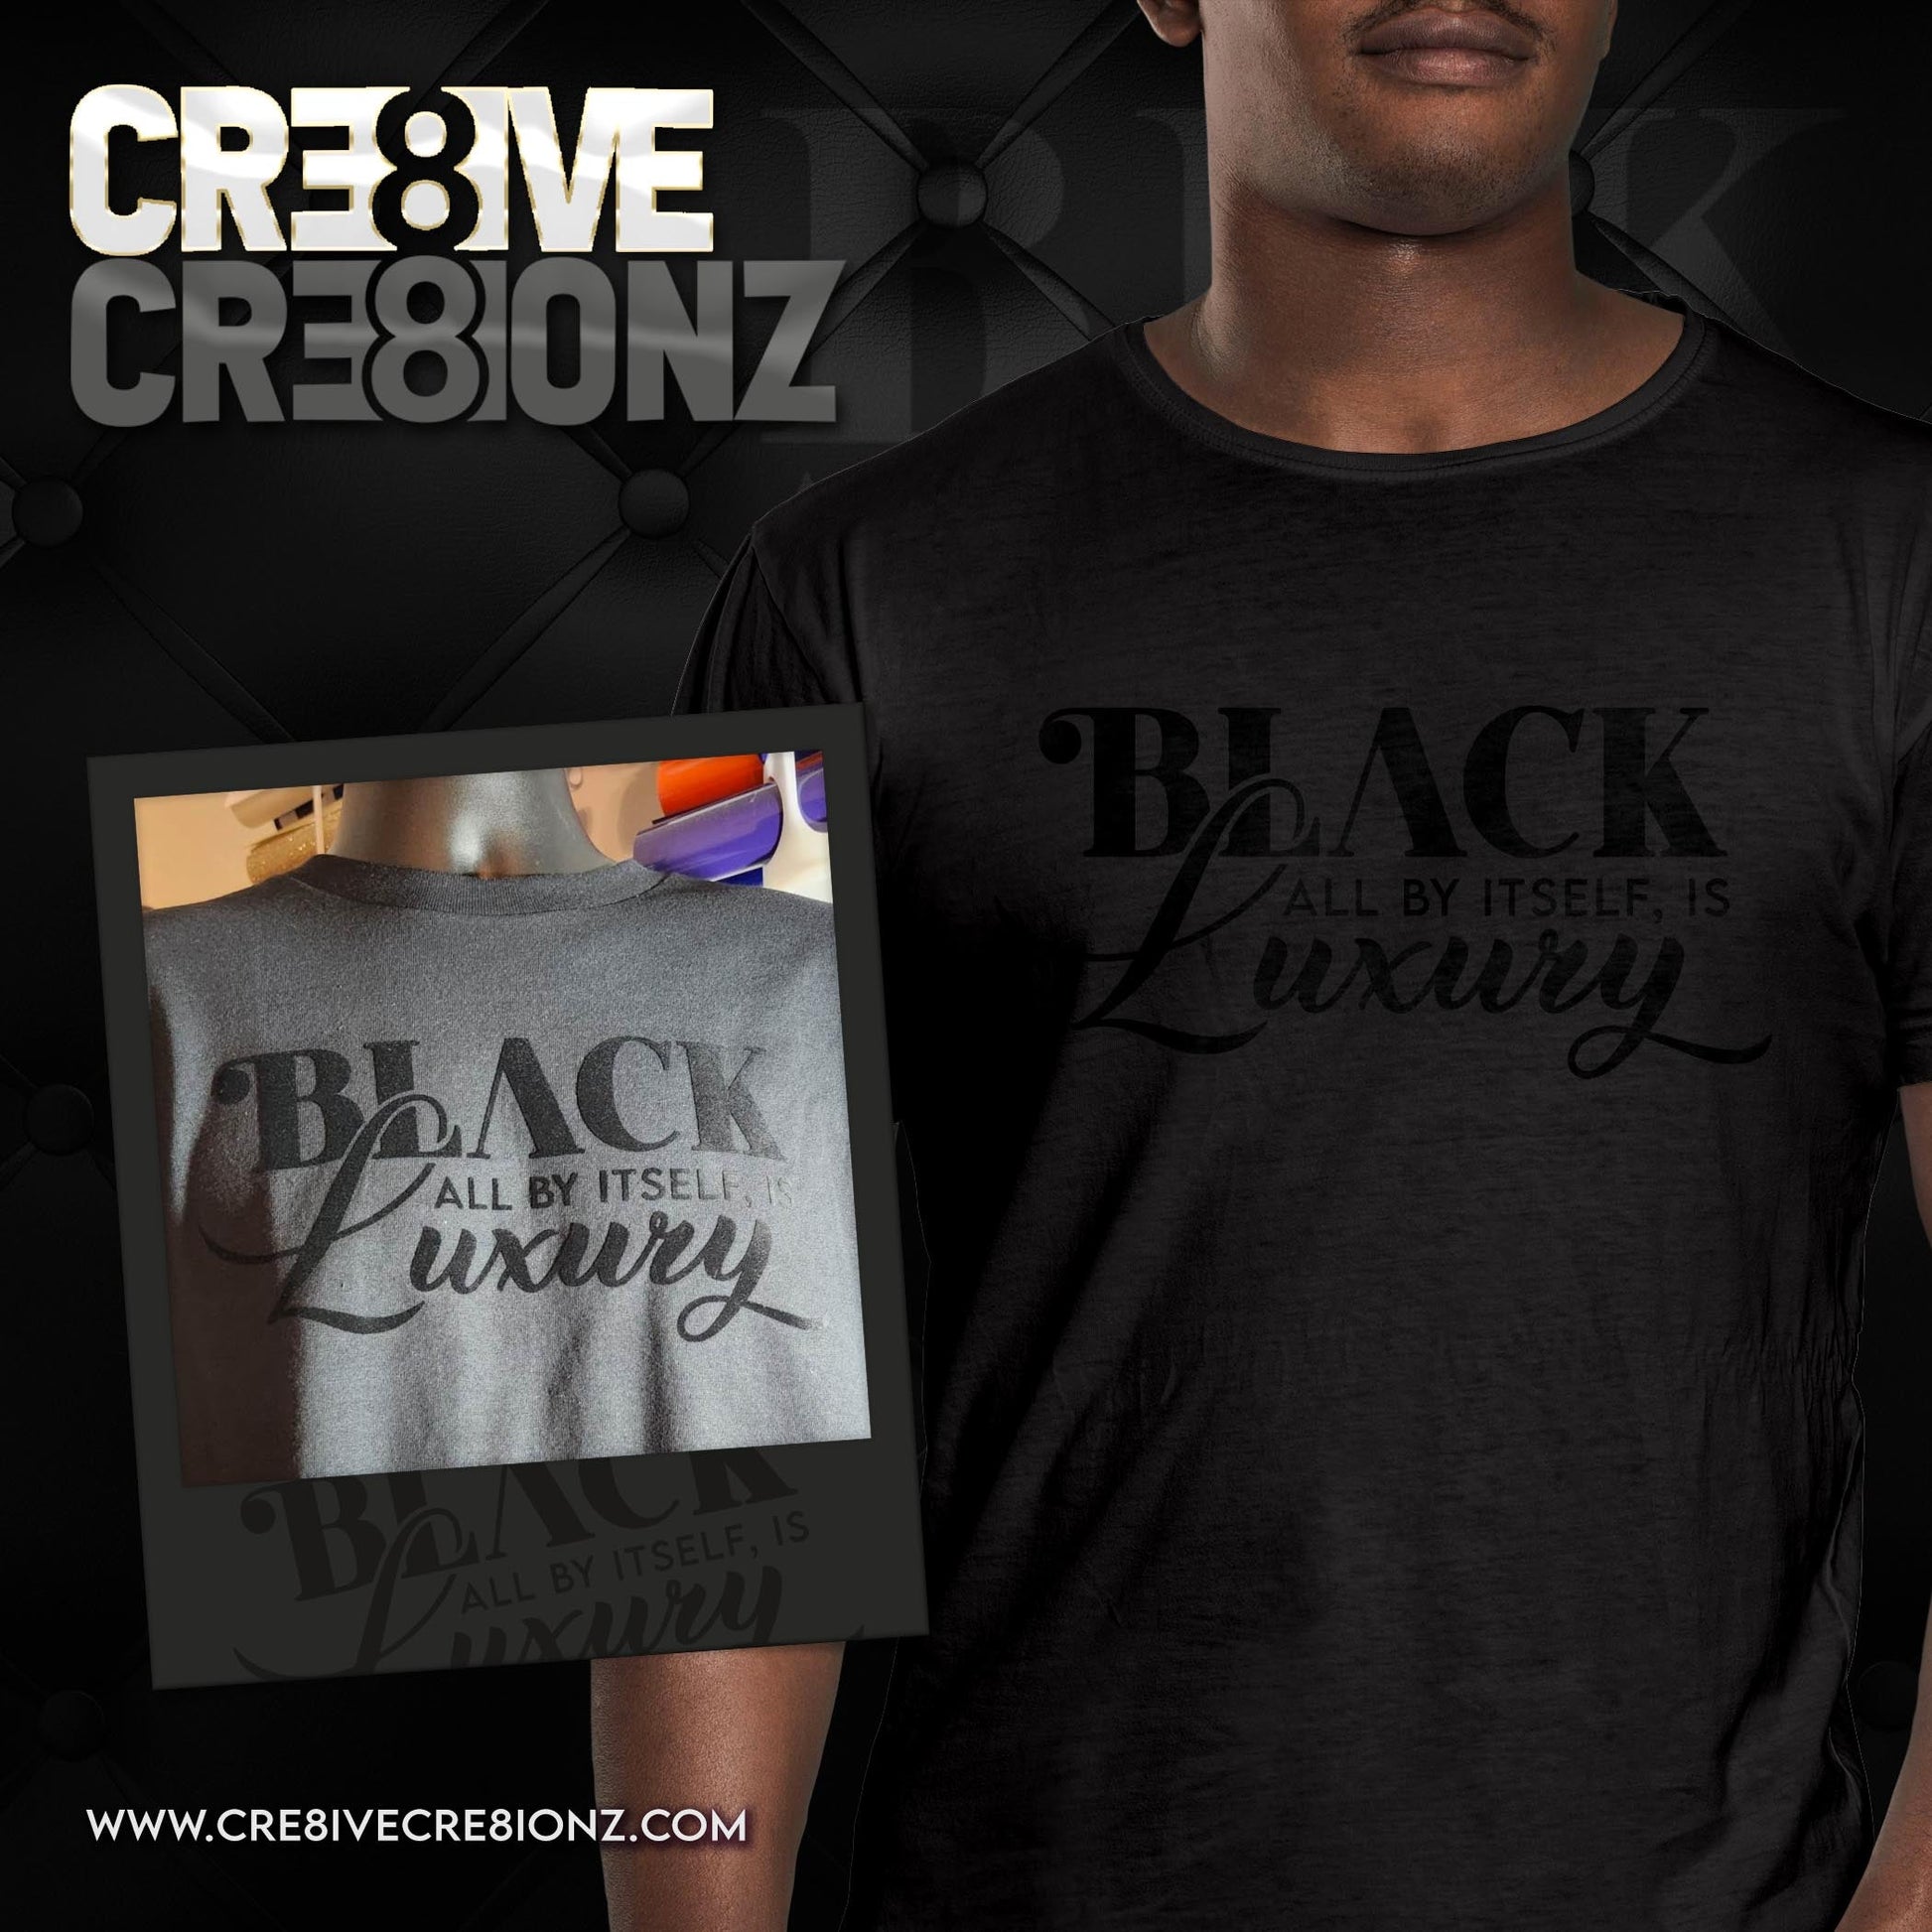 Black All By Itself, is Luxury Shirt - Cre8ive Cre8ionz